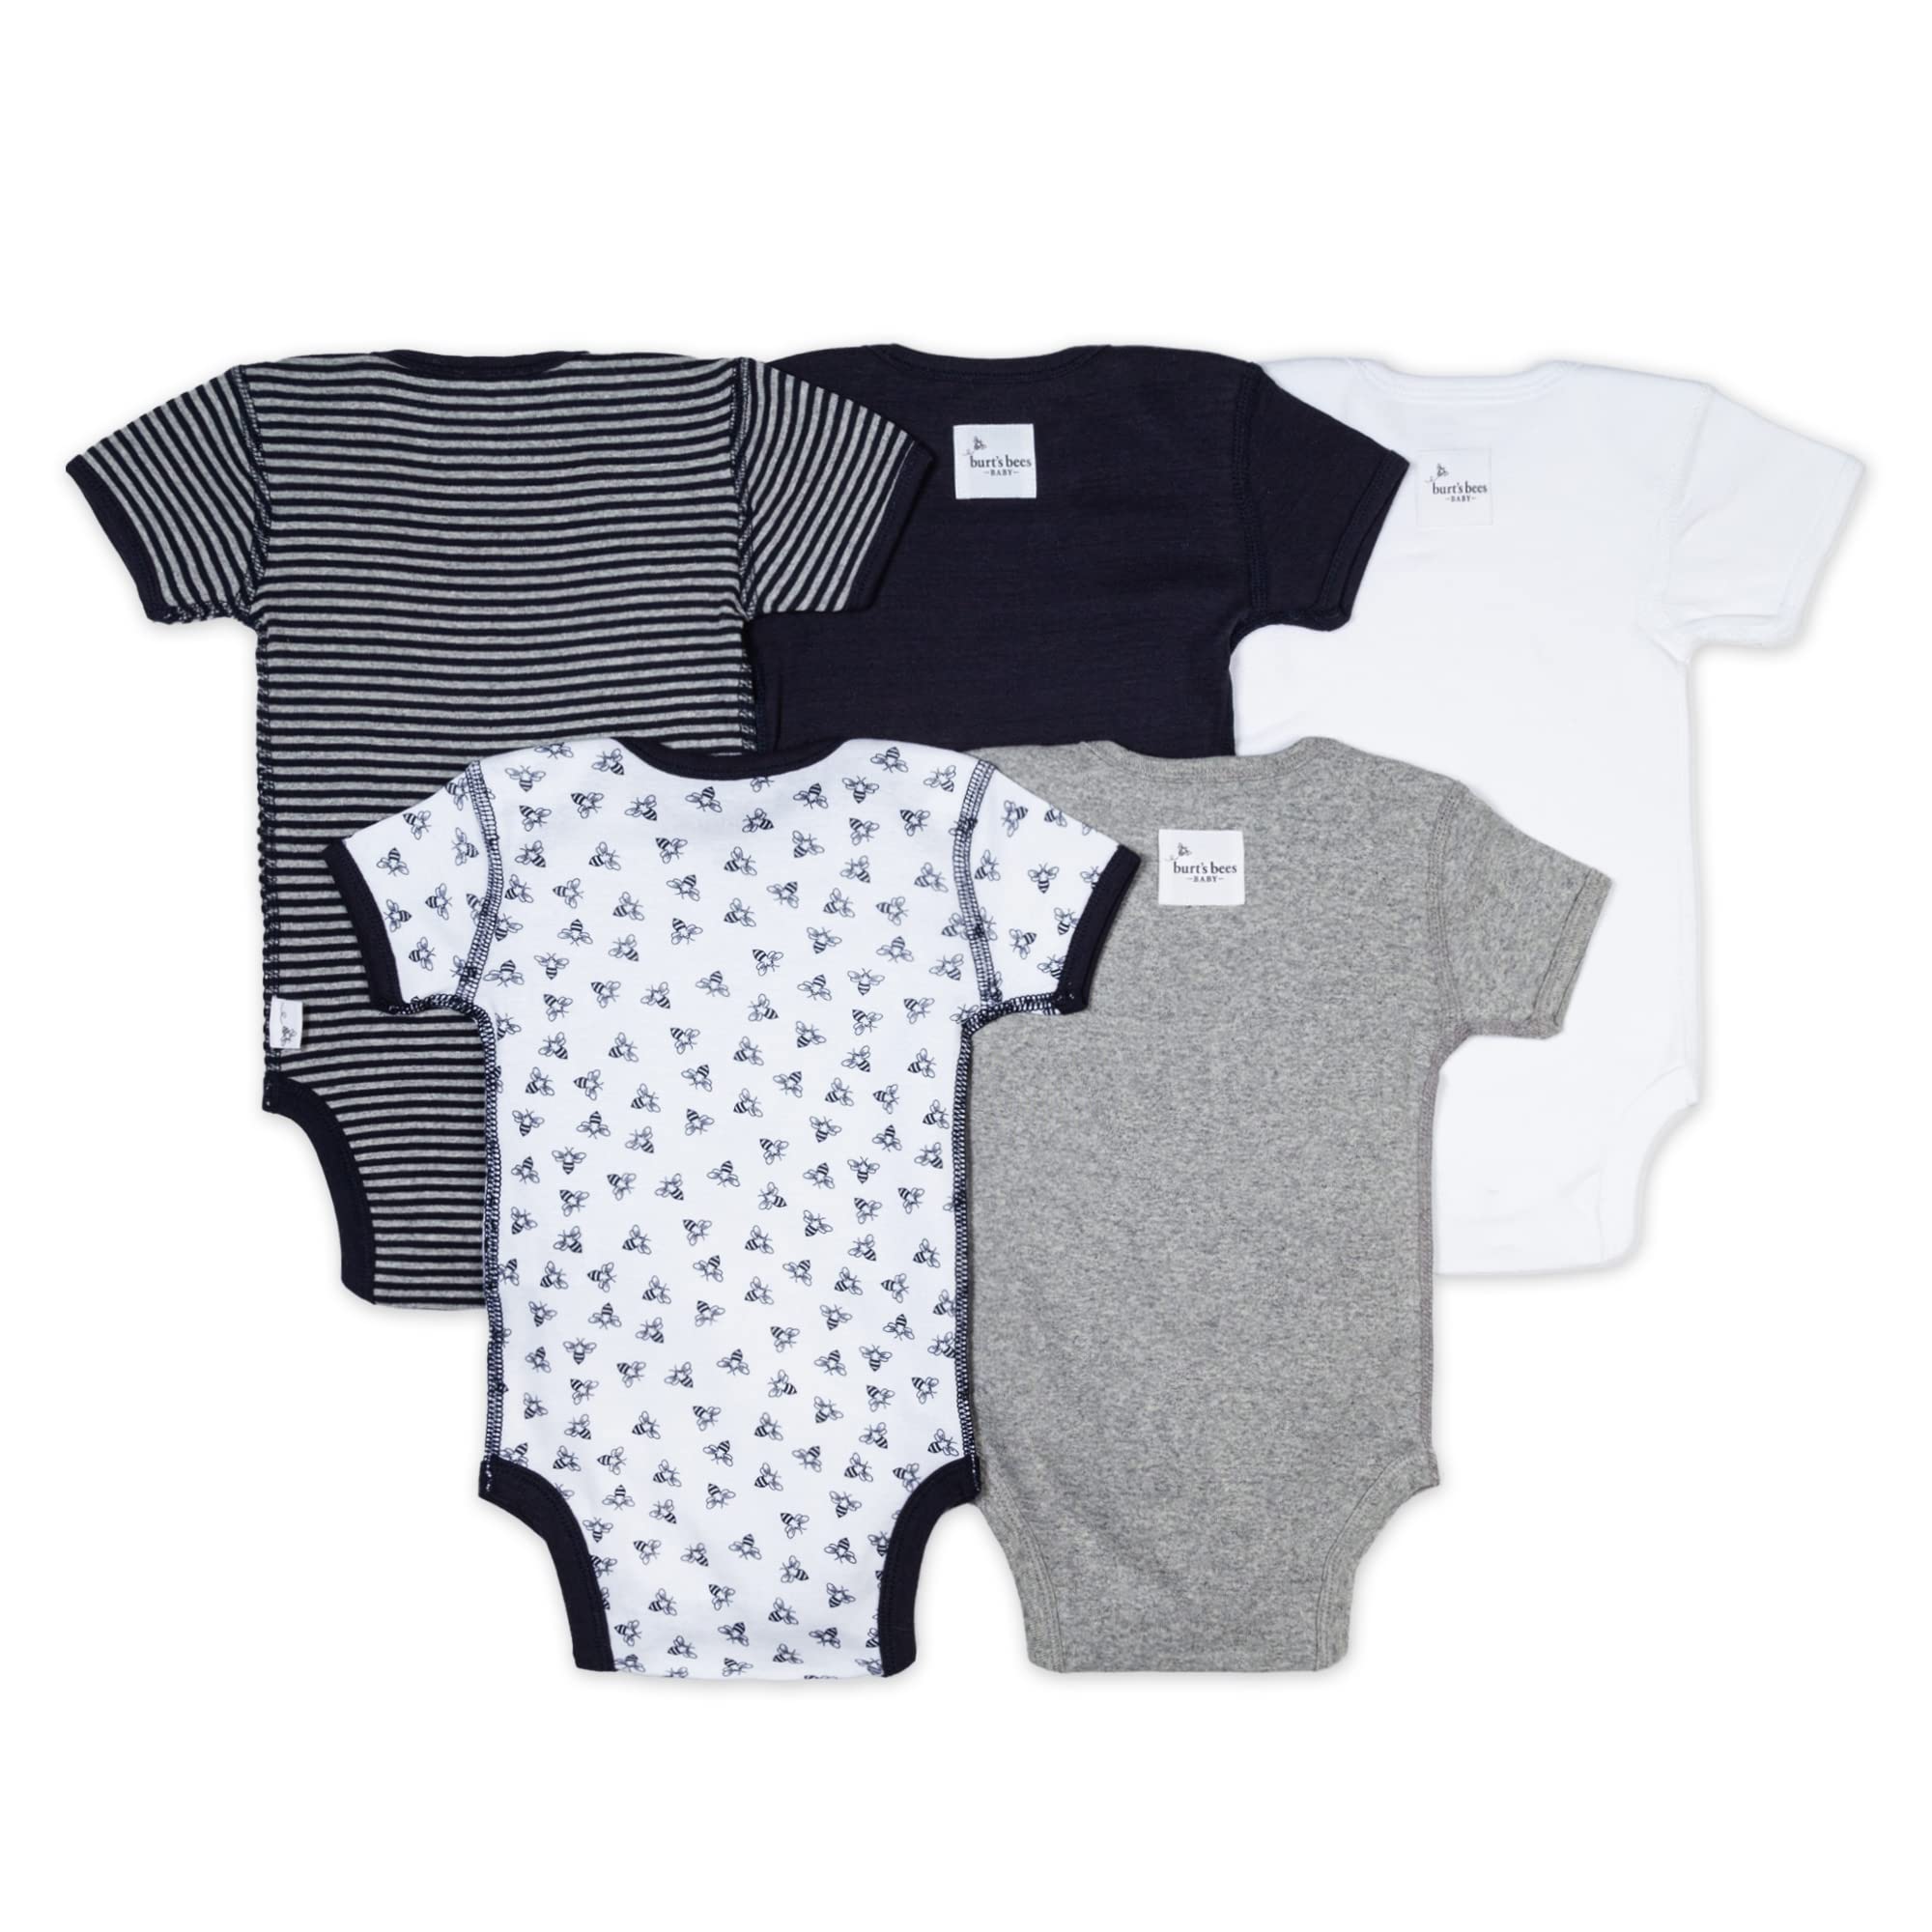 Burt's Bees Baby 5-Pack Short & Long Sleeve One-Pieces, 100% Organic Cotton